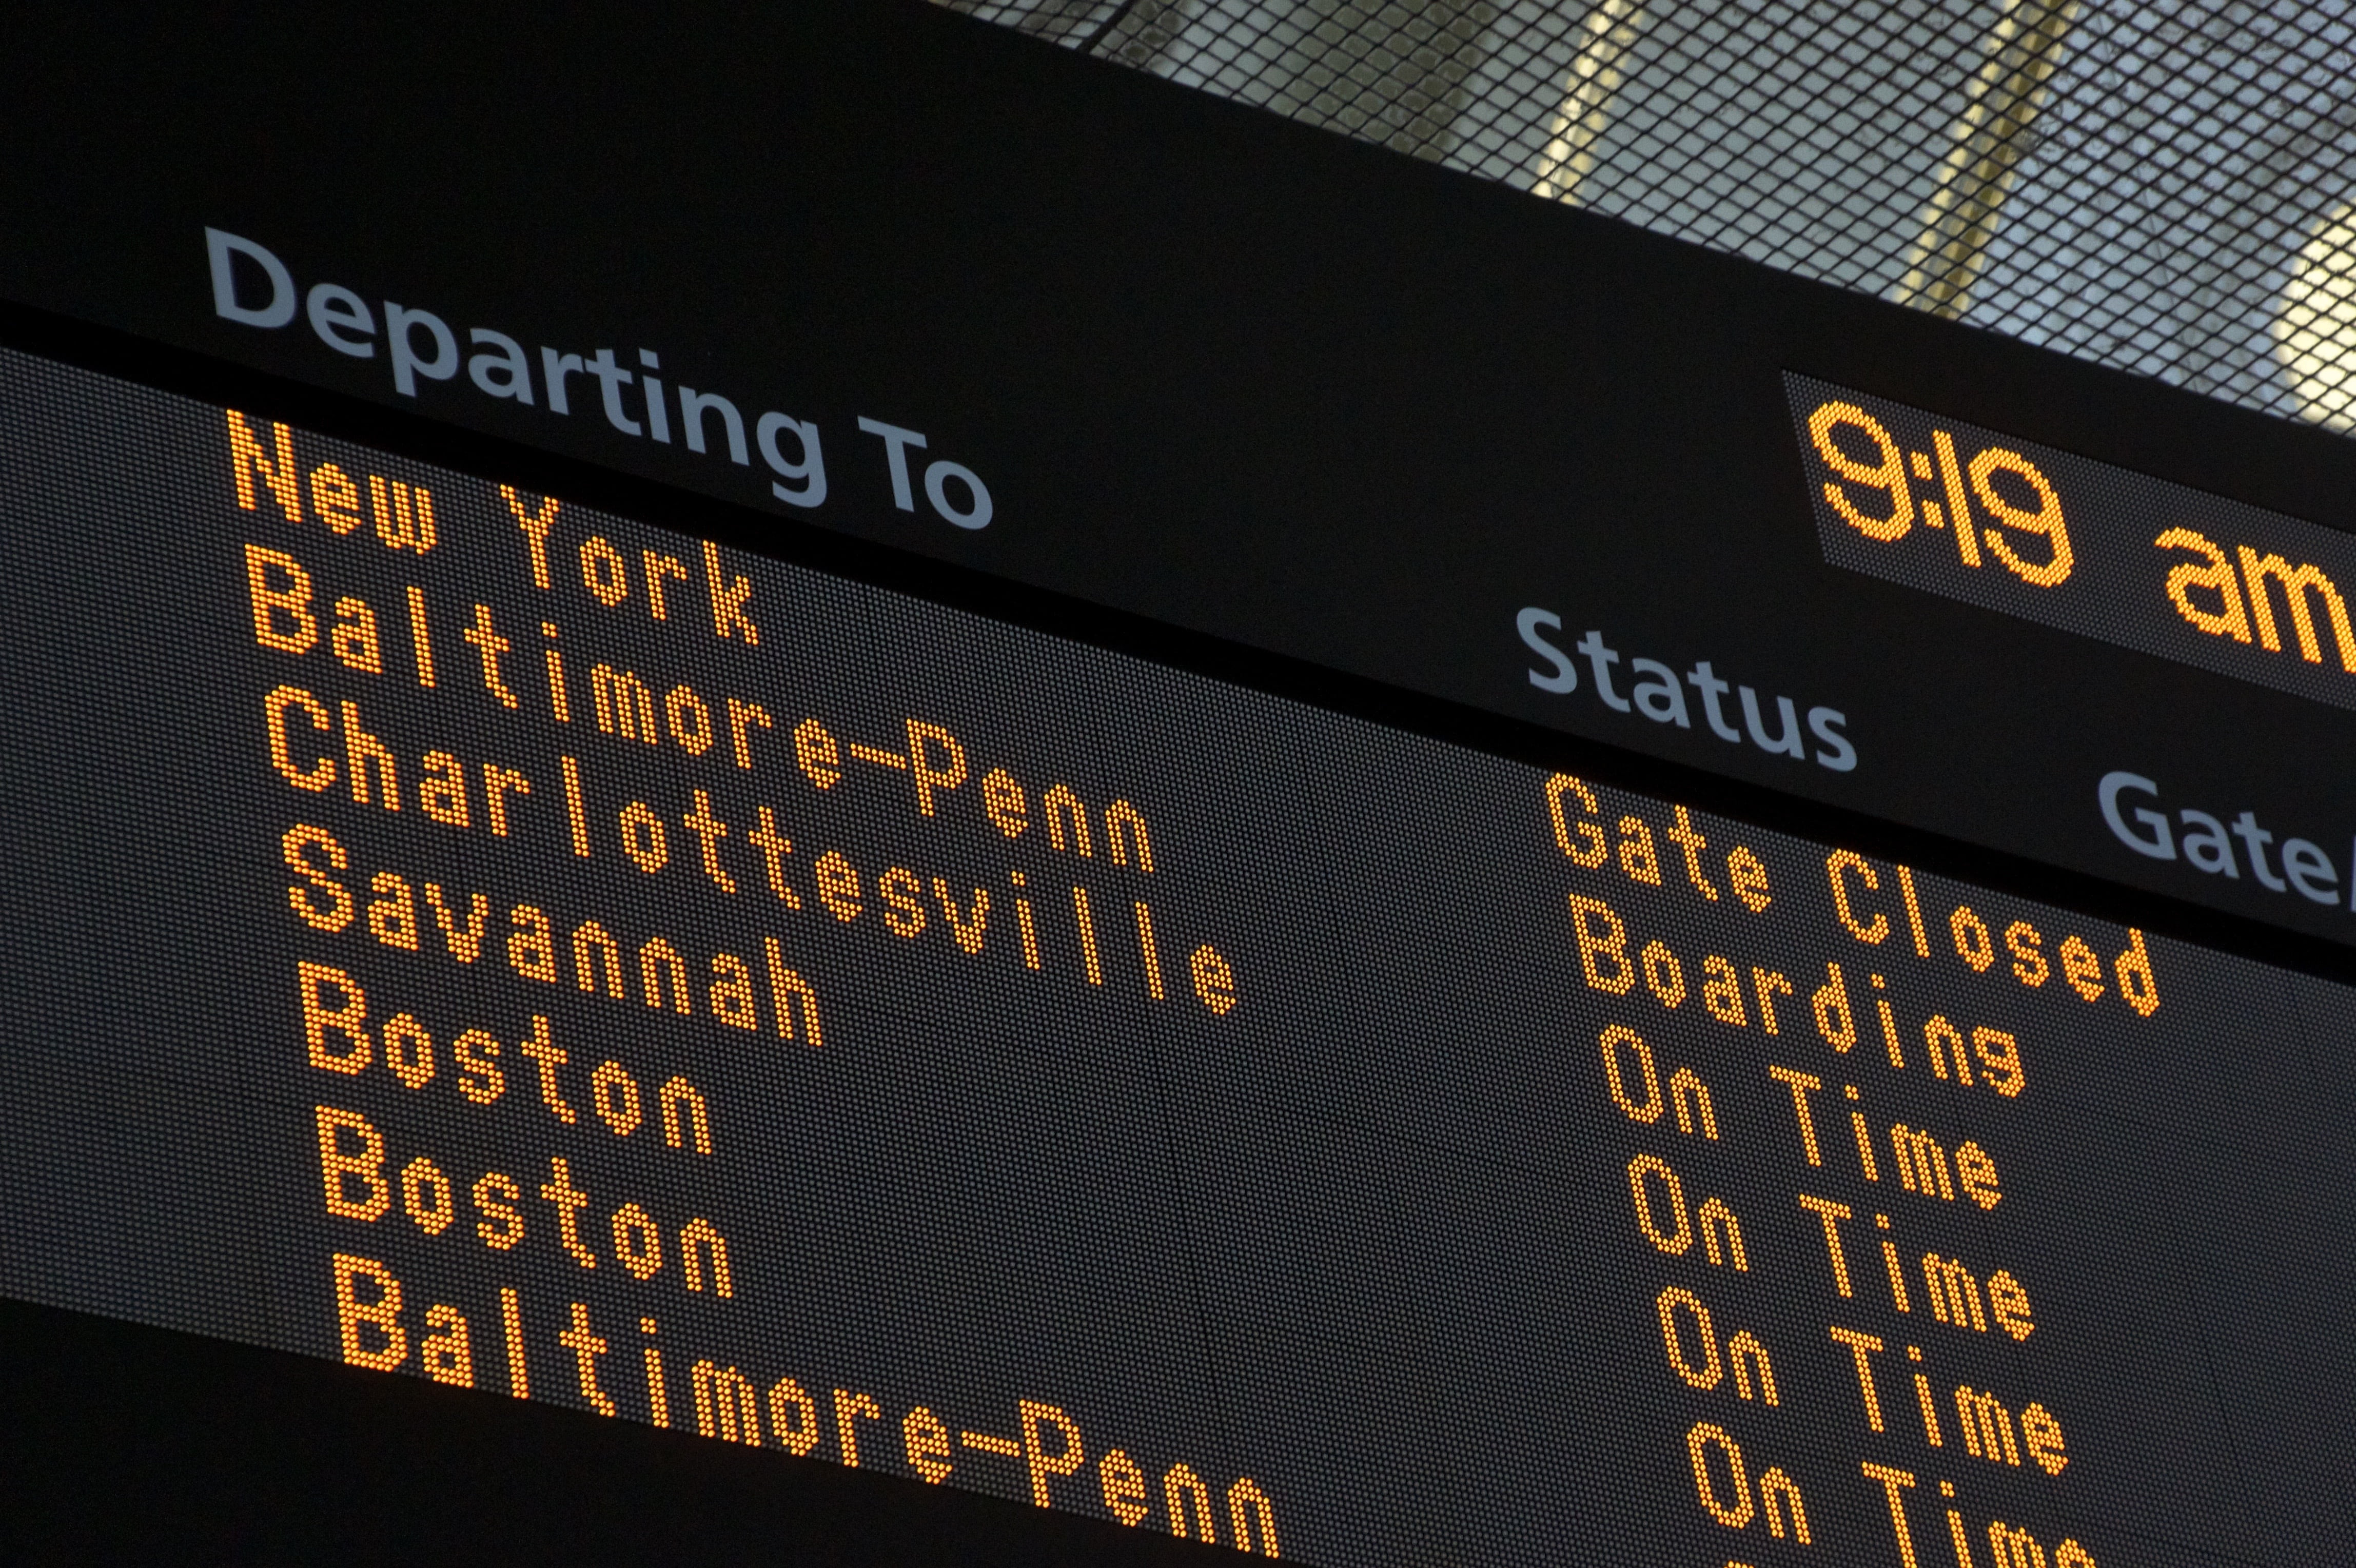 LED departure board, sign, train station, departing to, airport